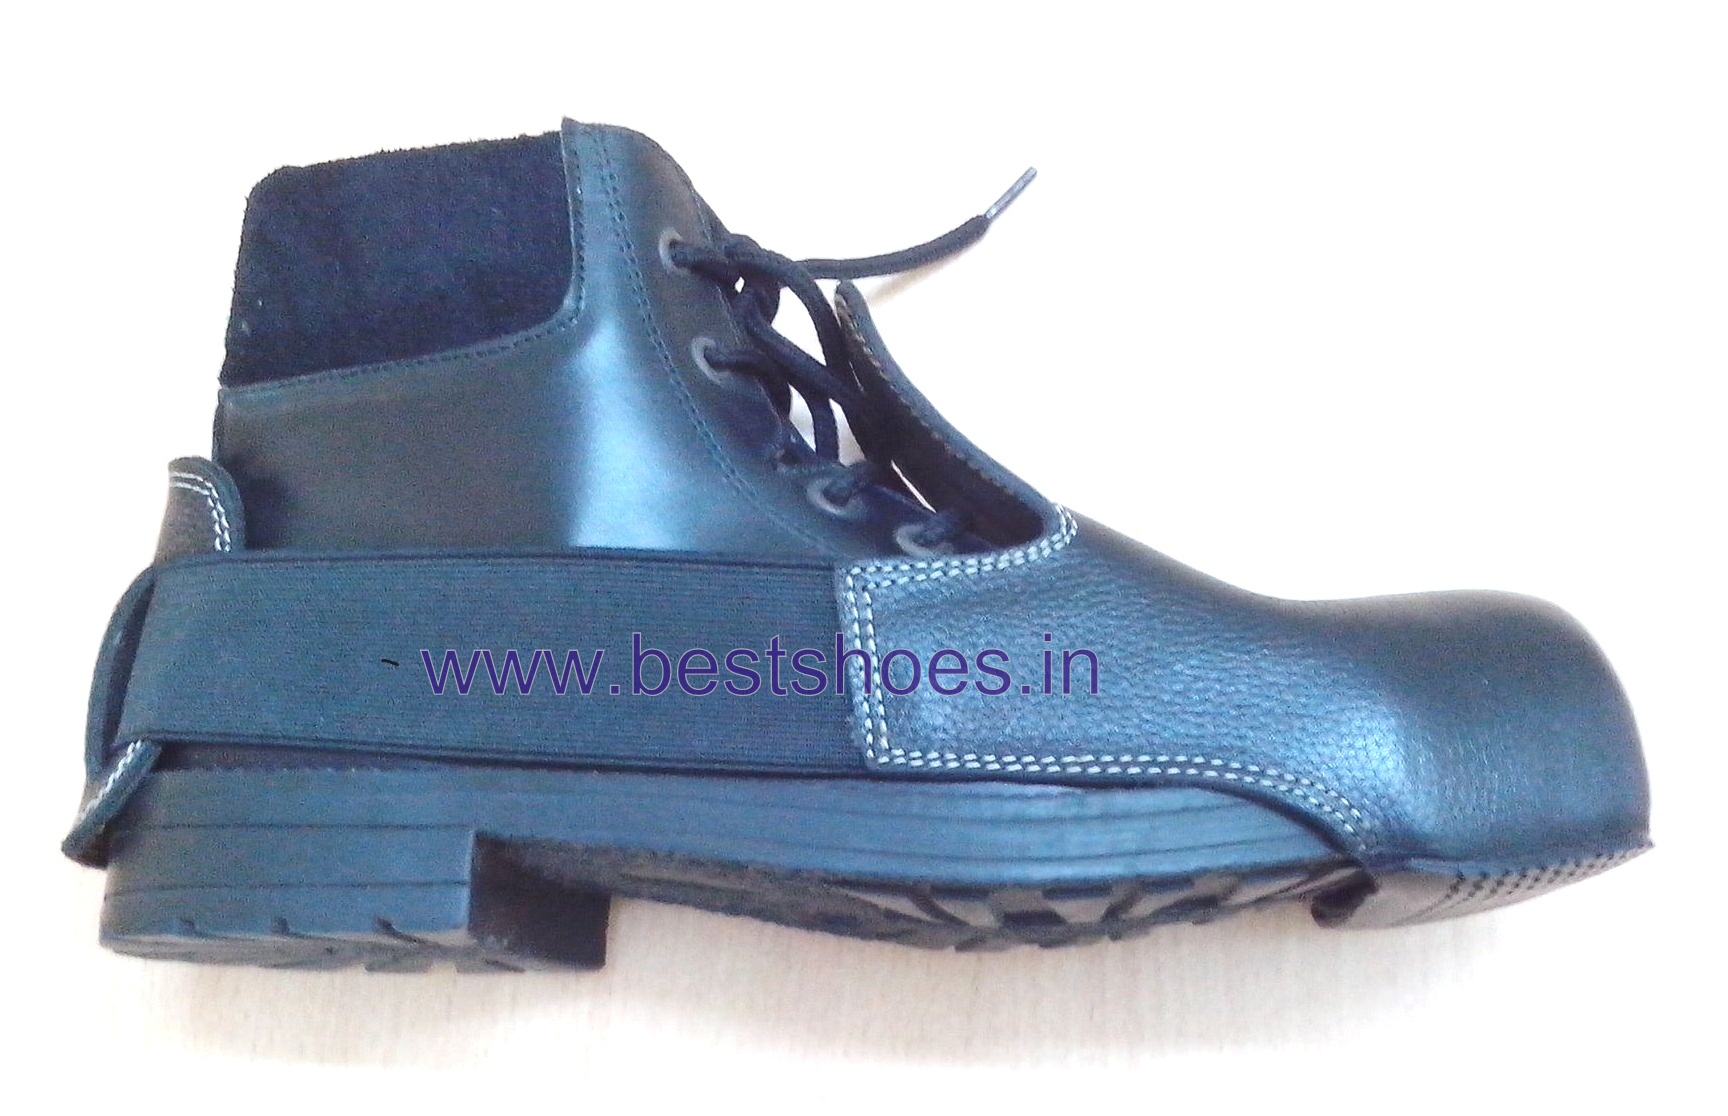 steel toe cover for shoes